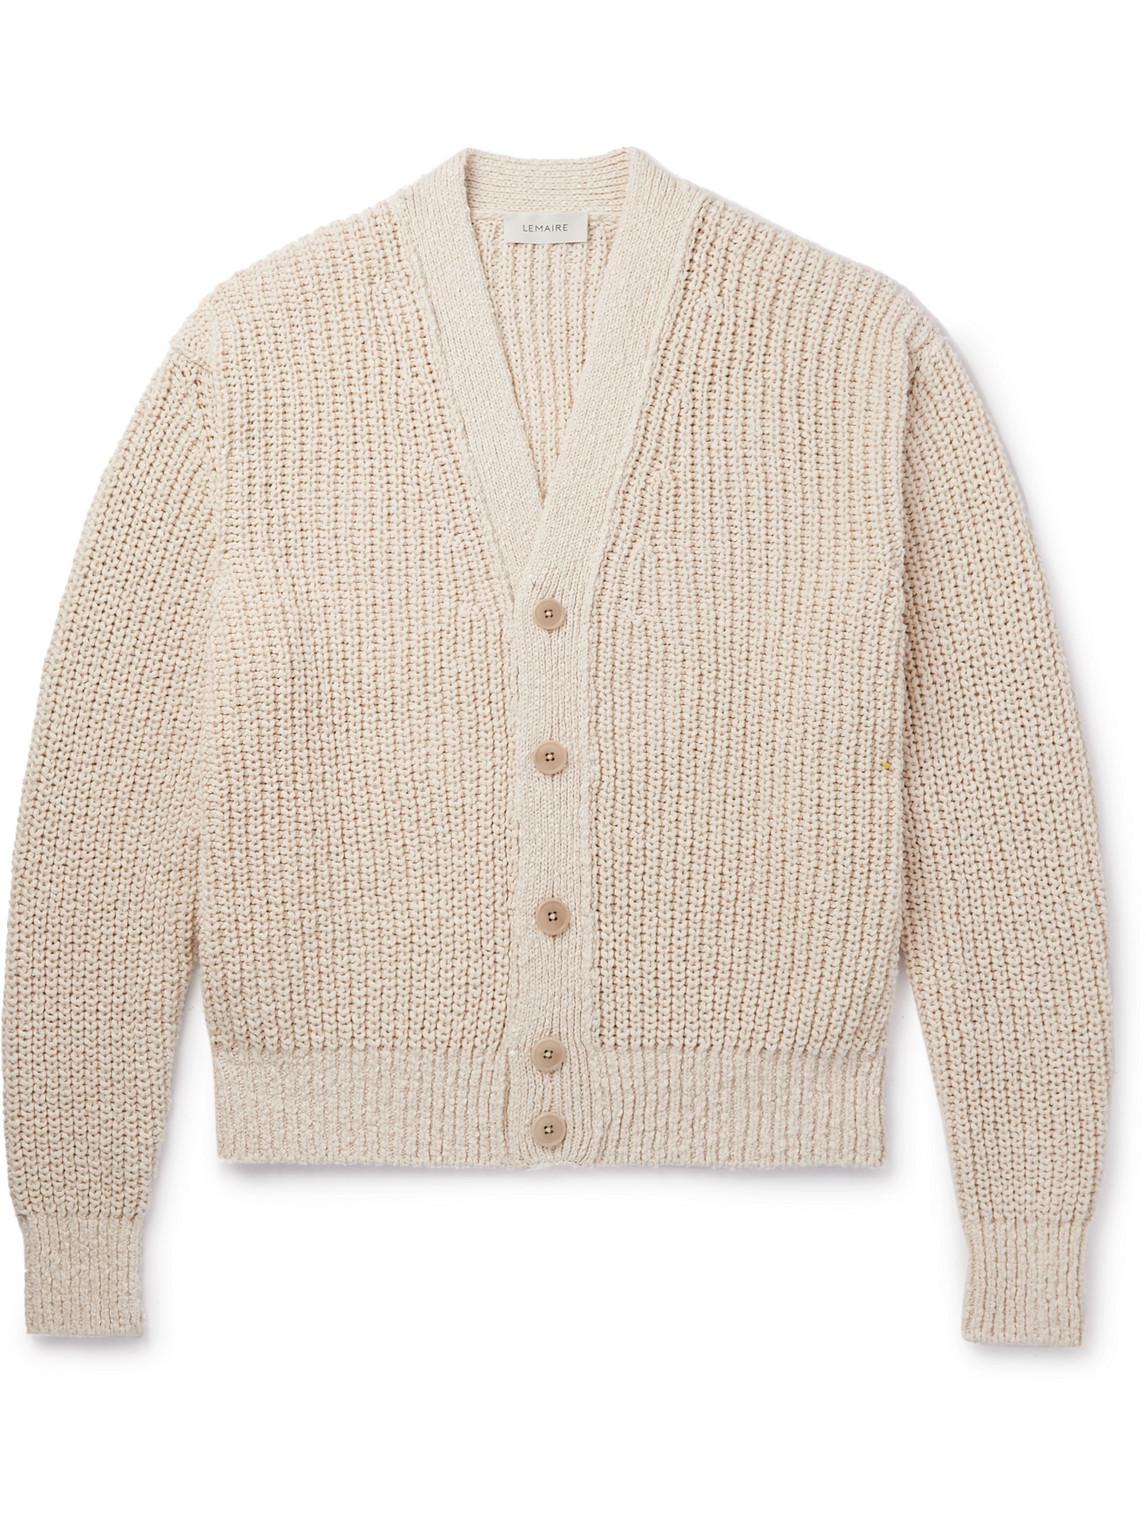 Lemaire Ribbed Cotton Cardigan in Natural for Men | Lyst